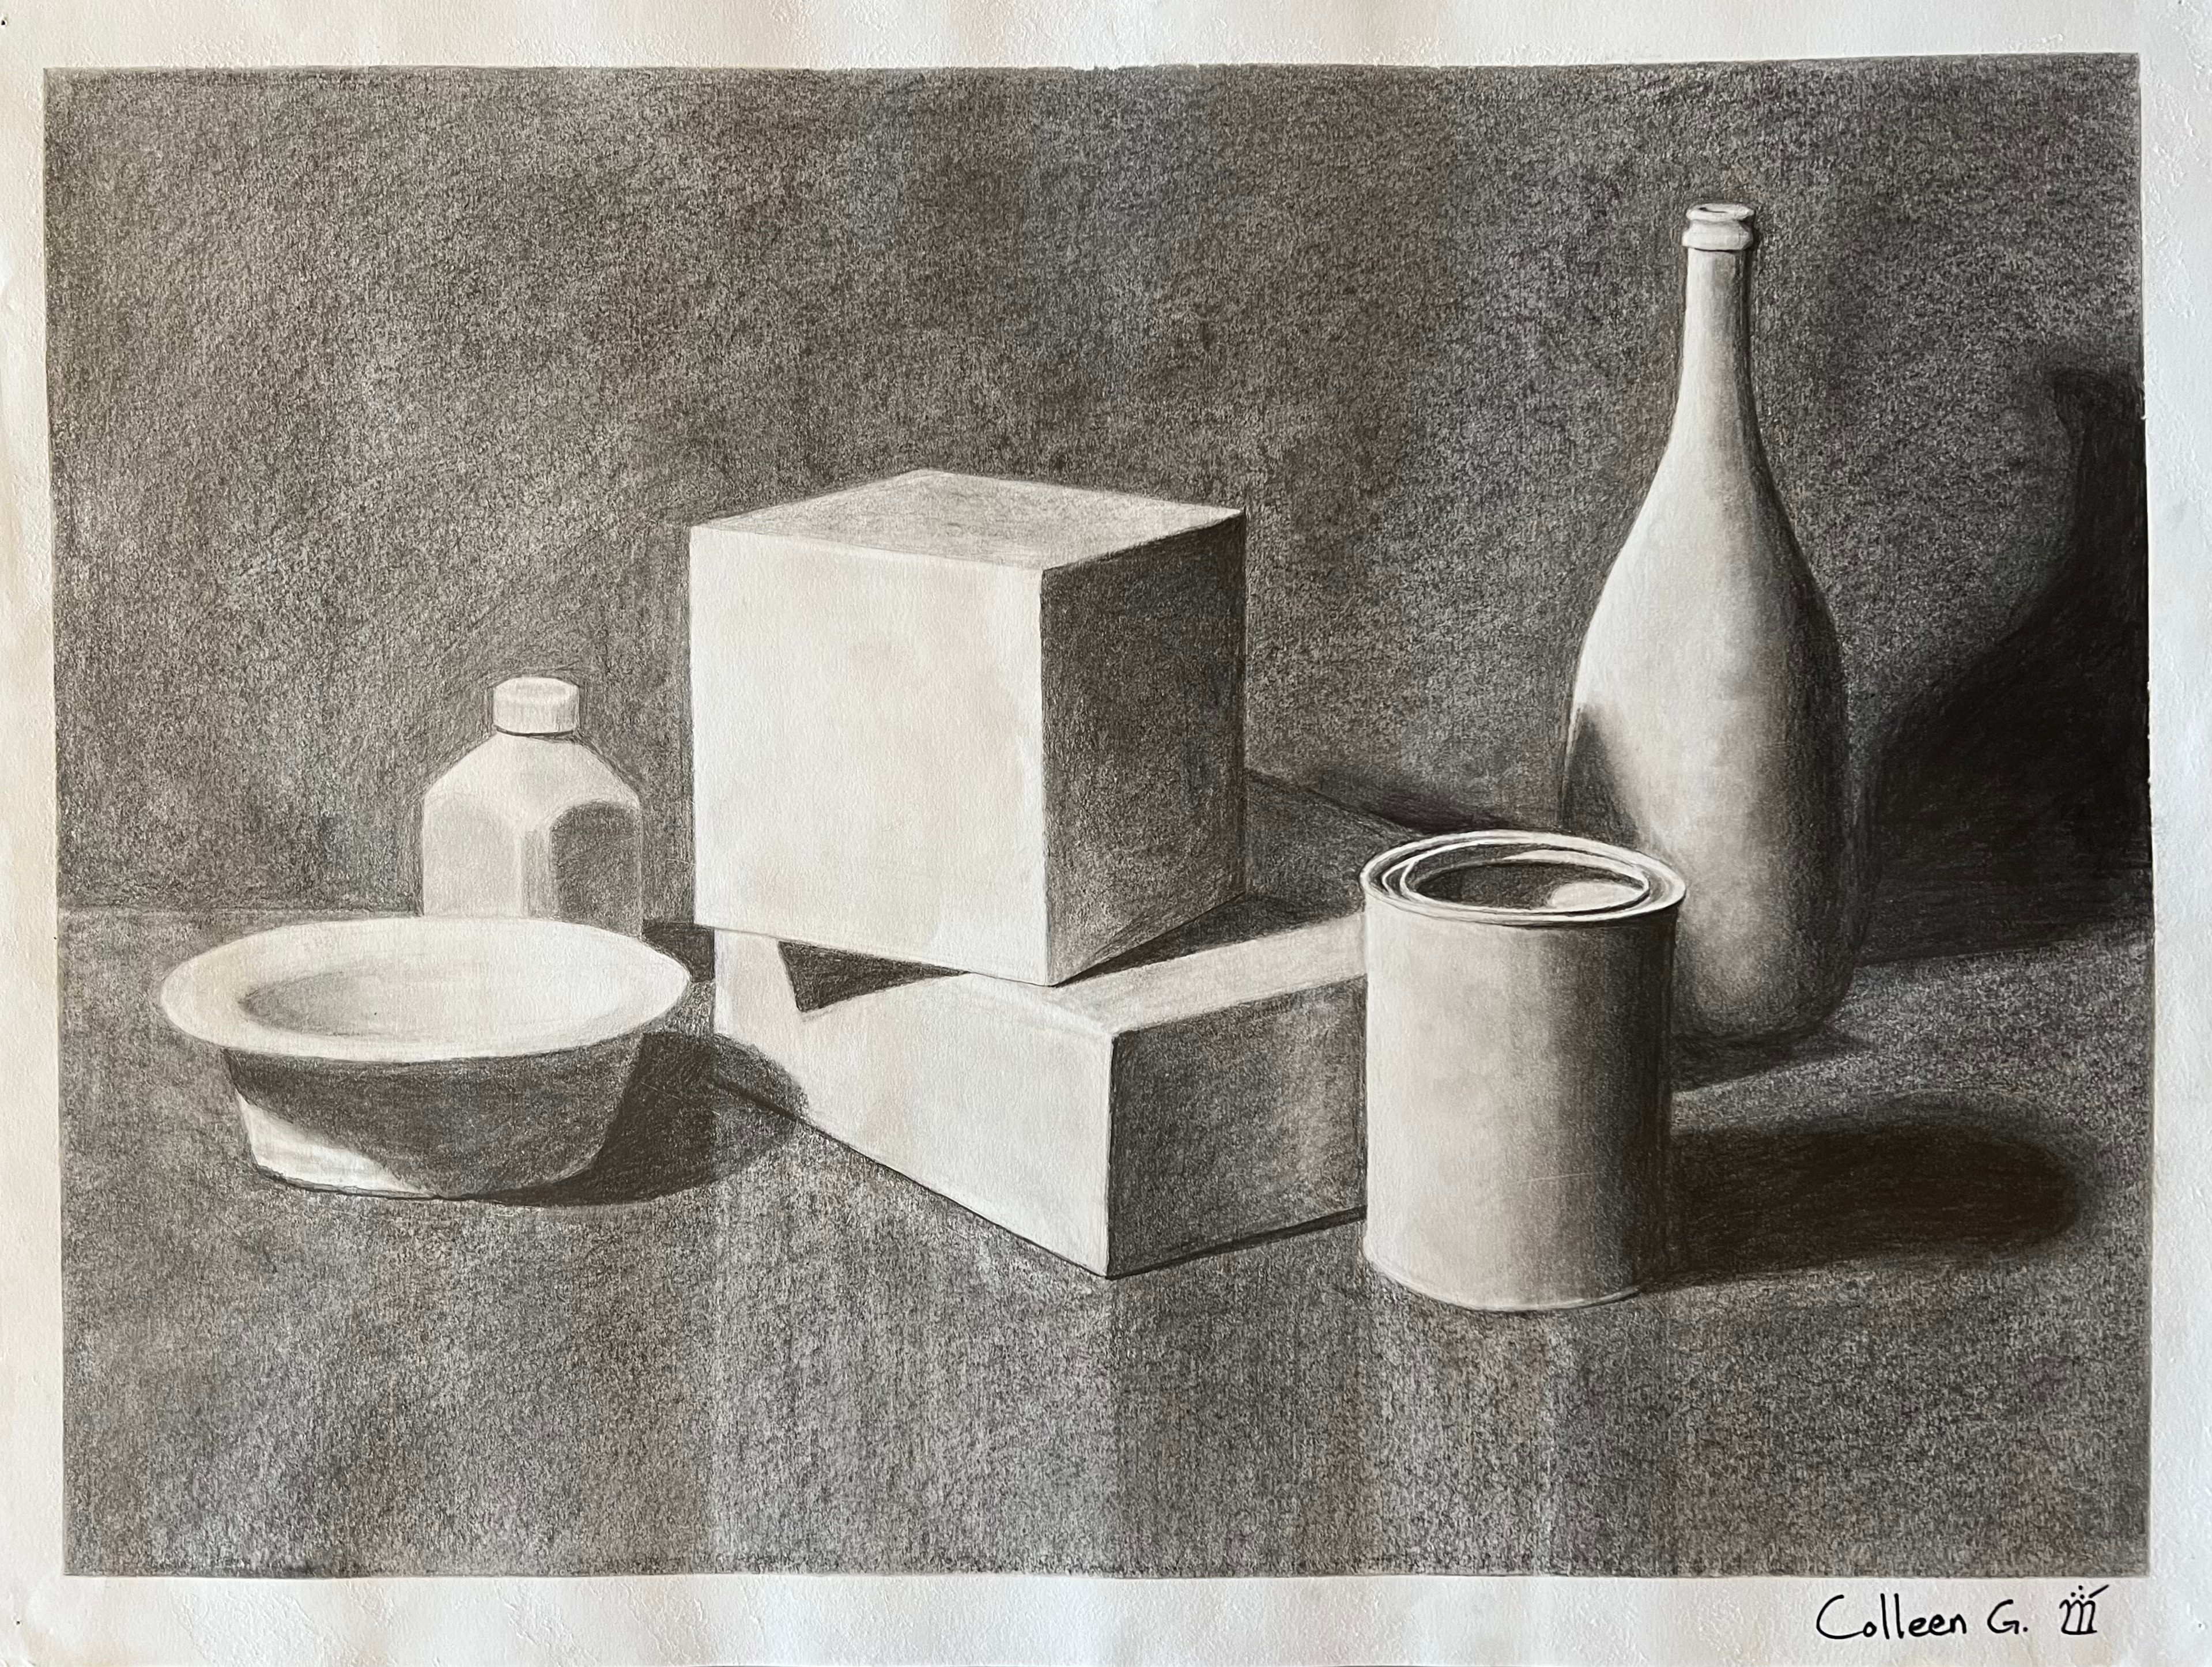 My first official piece from this course. This still life was done entirely in graphite.
No idea how long this took. Upwards of 8-10 hours? I can't remember.